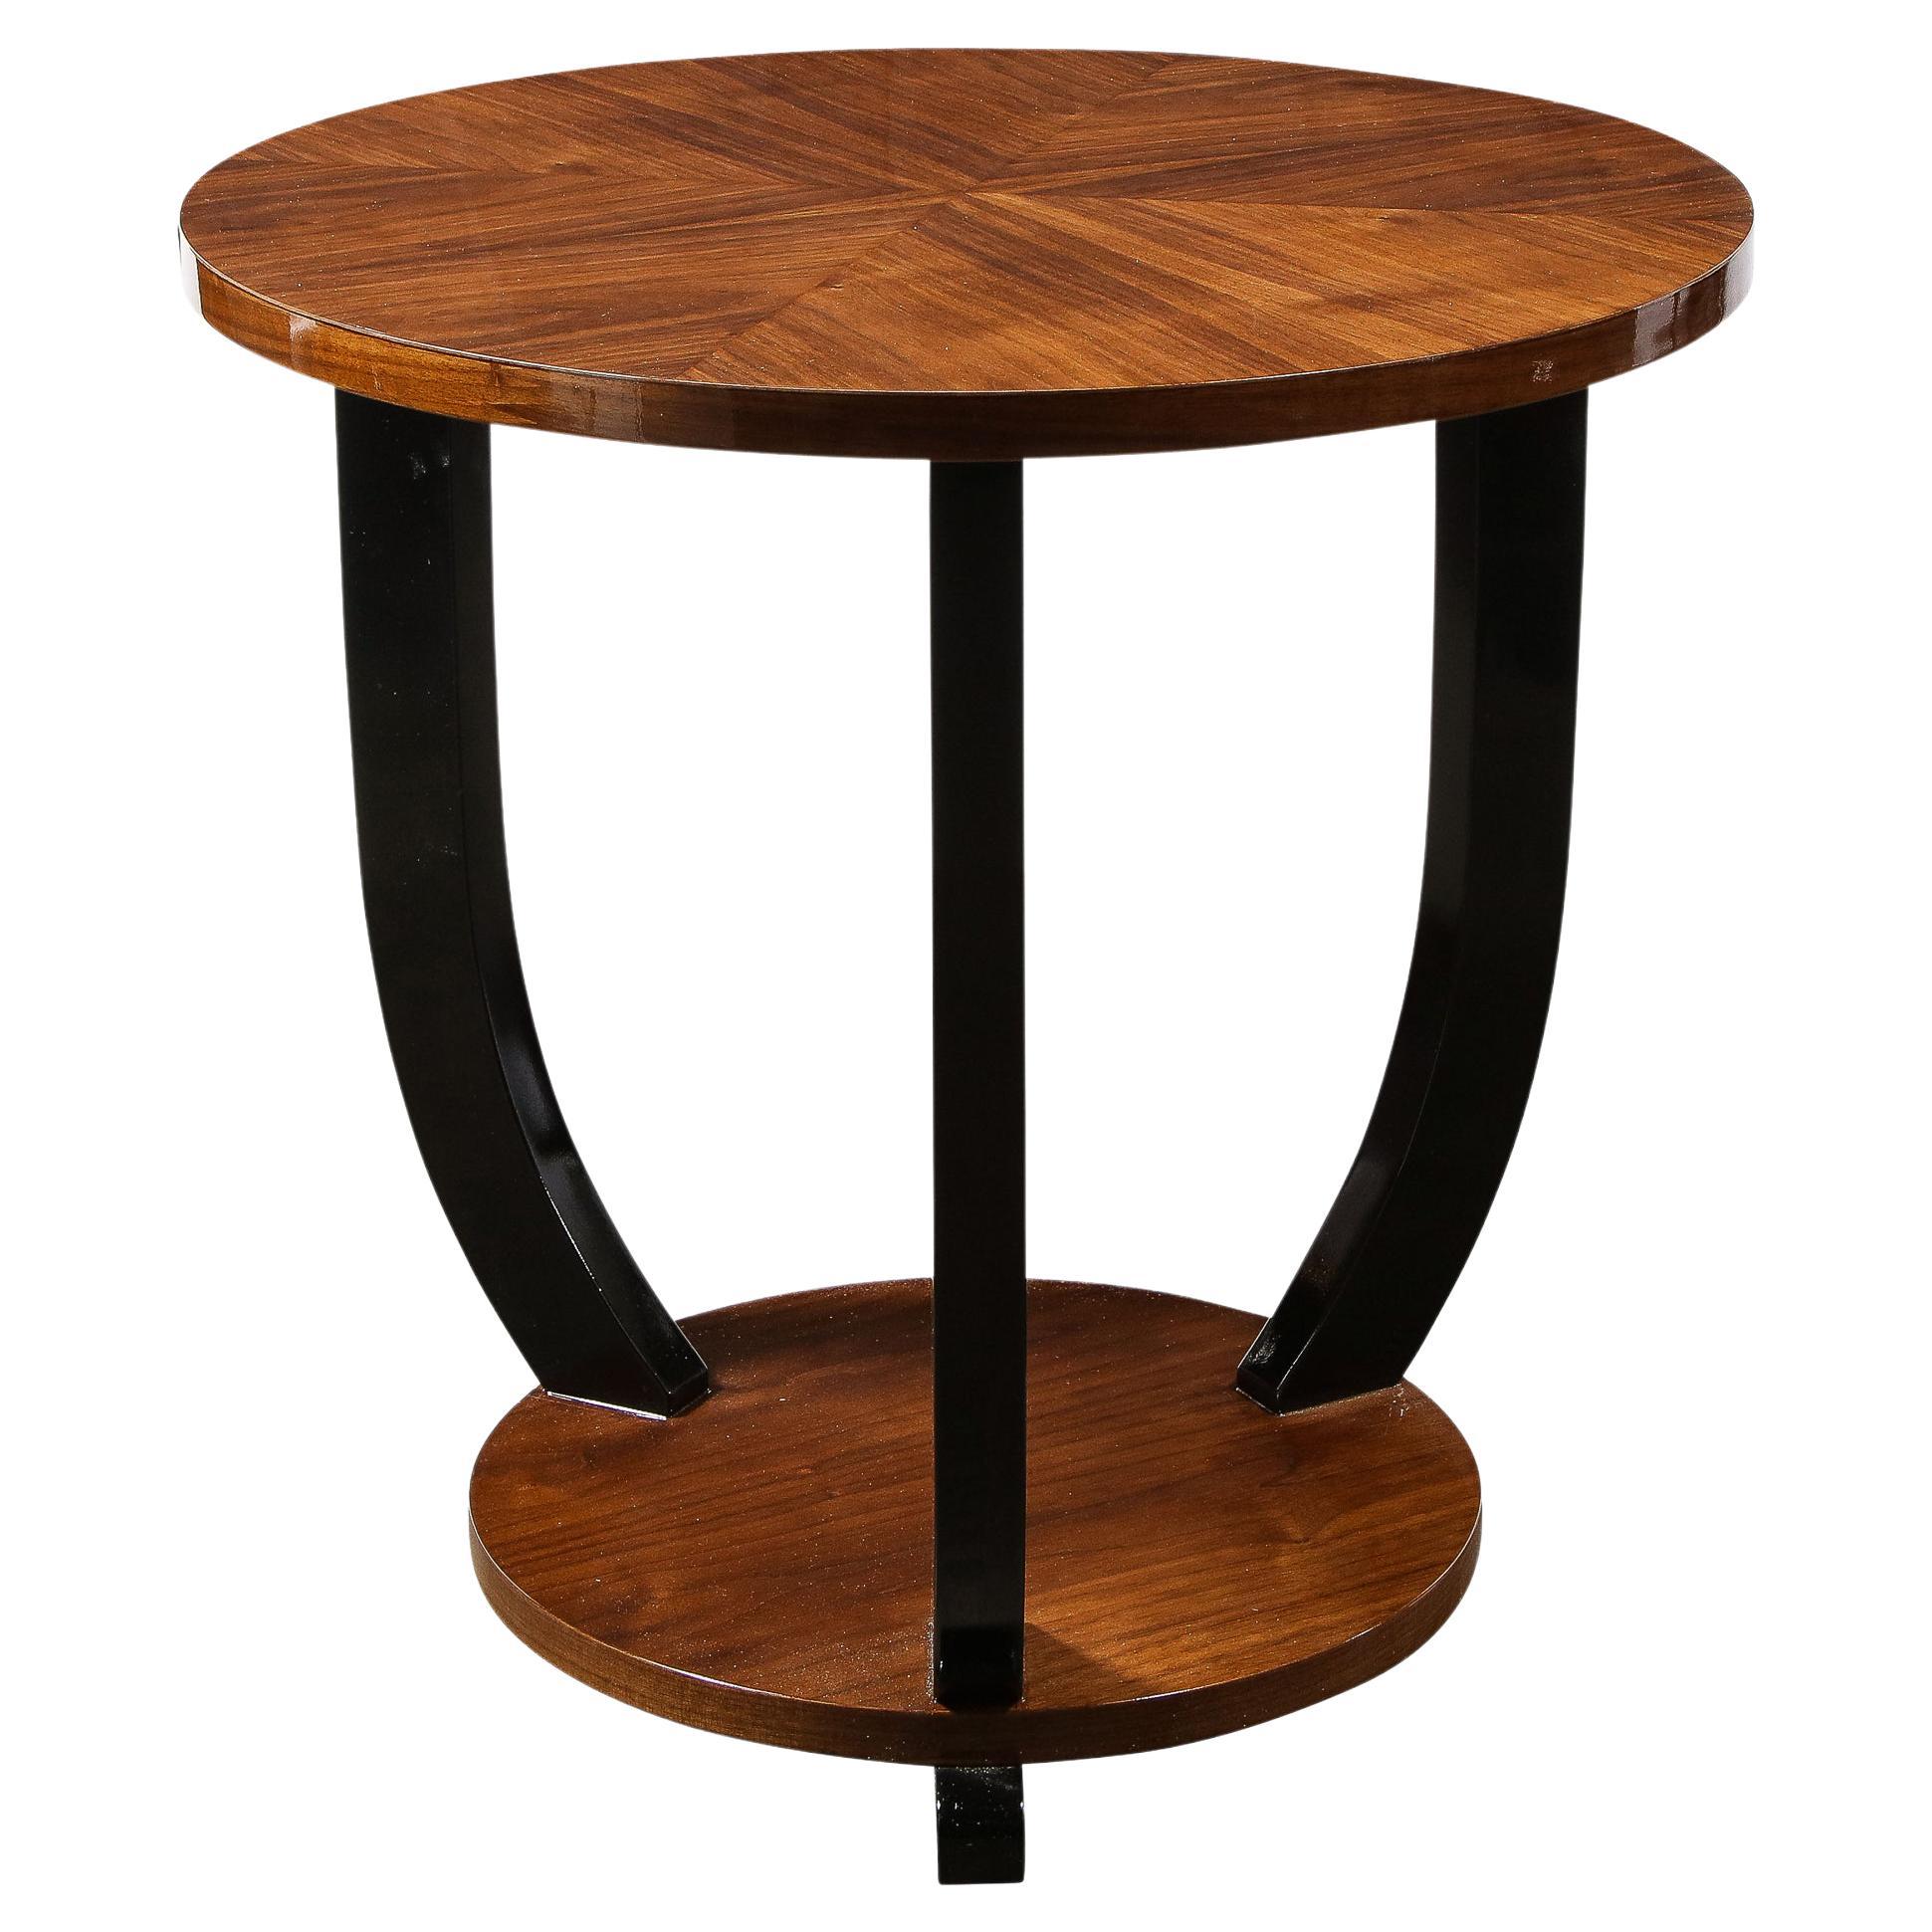 French Art Deco Two-Tiered Bookmatched Walnut & Black Lacquer Gueridon Table For Sale